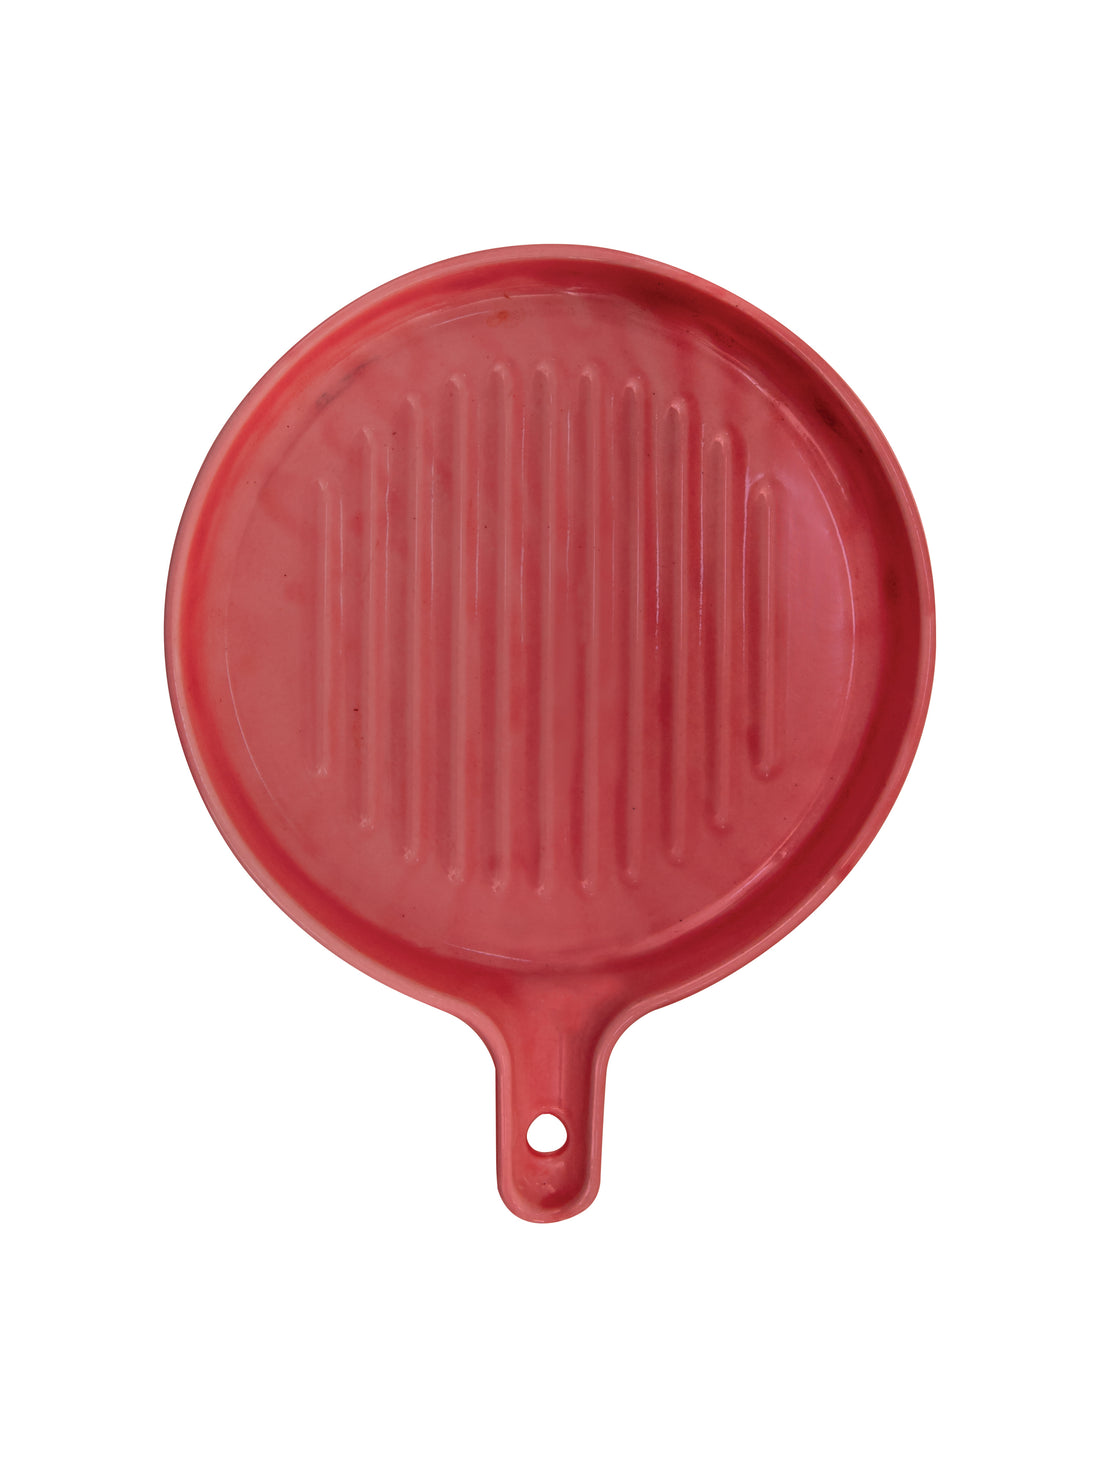 Ceramic Round Grill Plates for Serving, Red Color